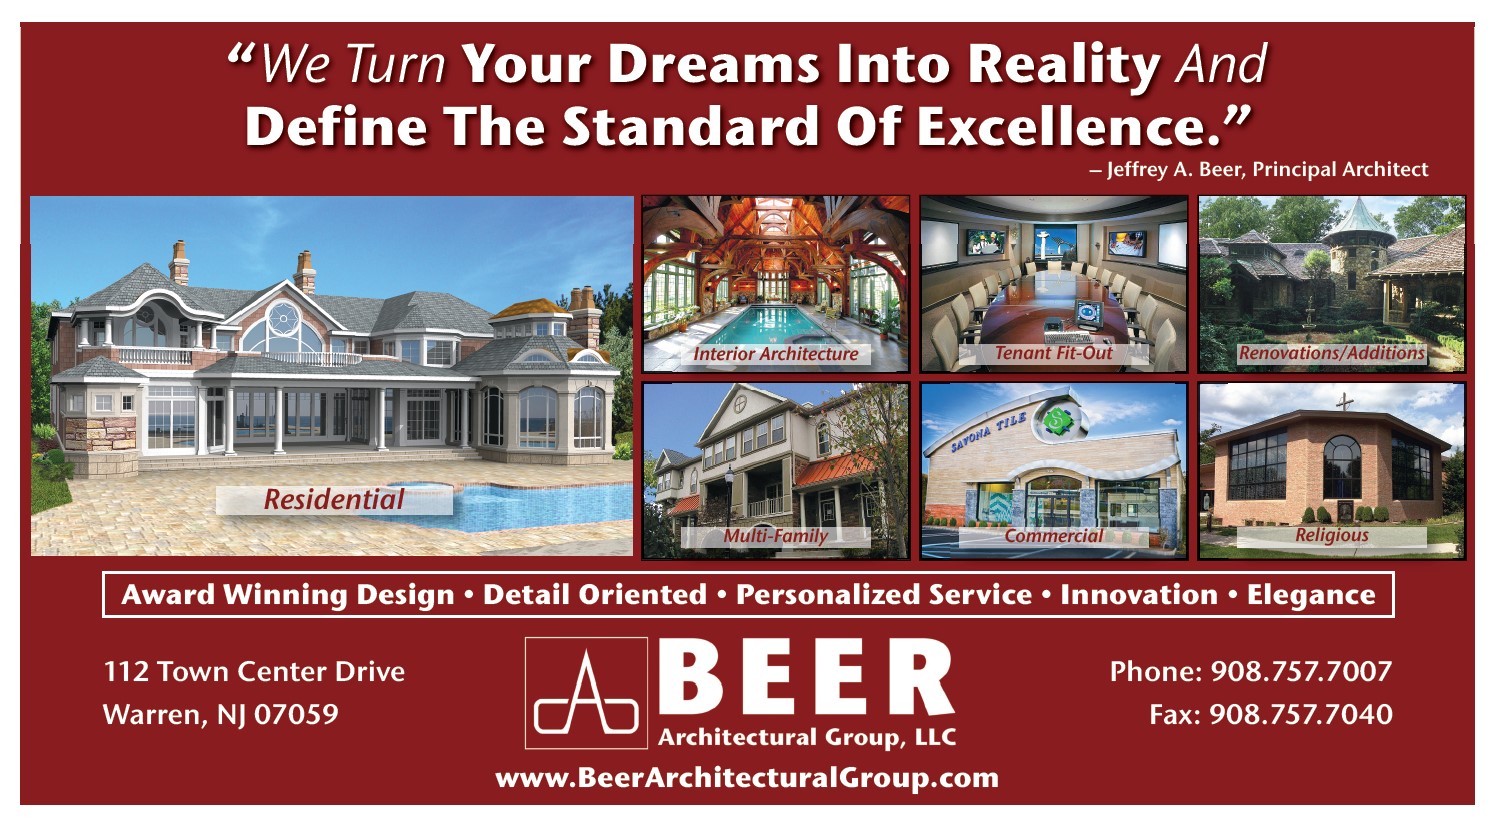 Beer Architectural Group